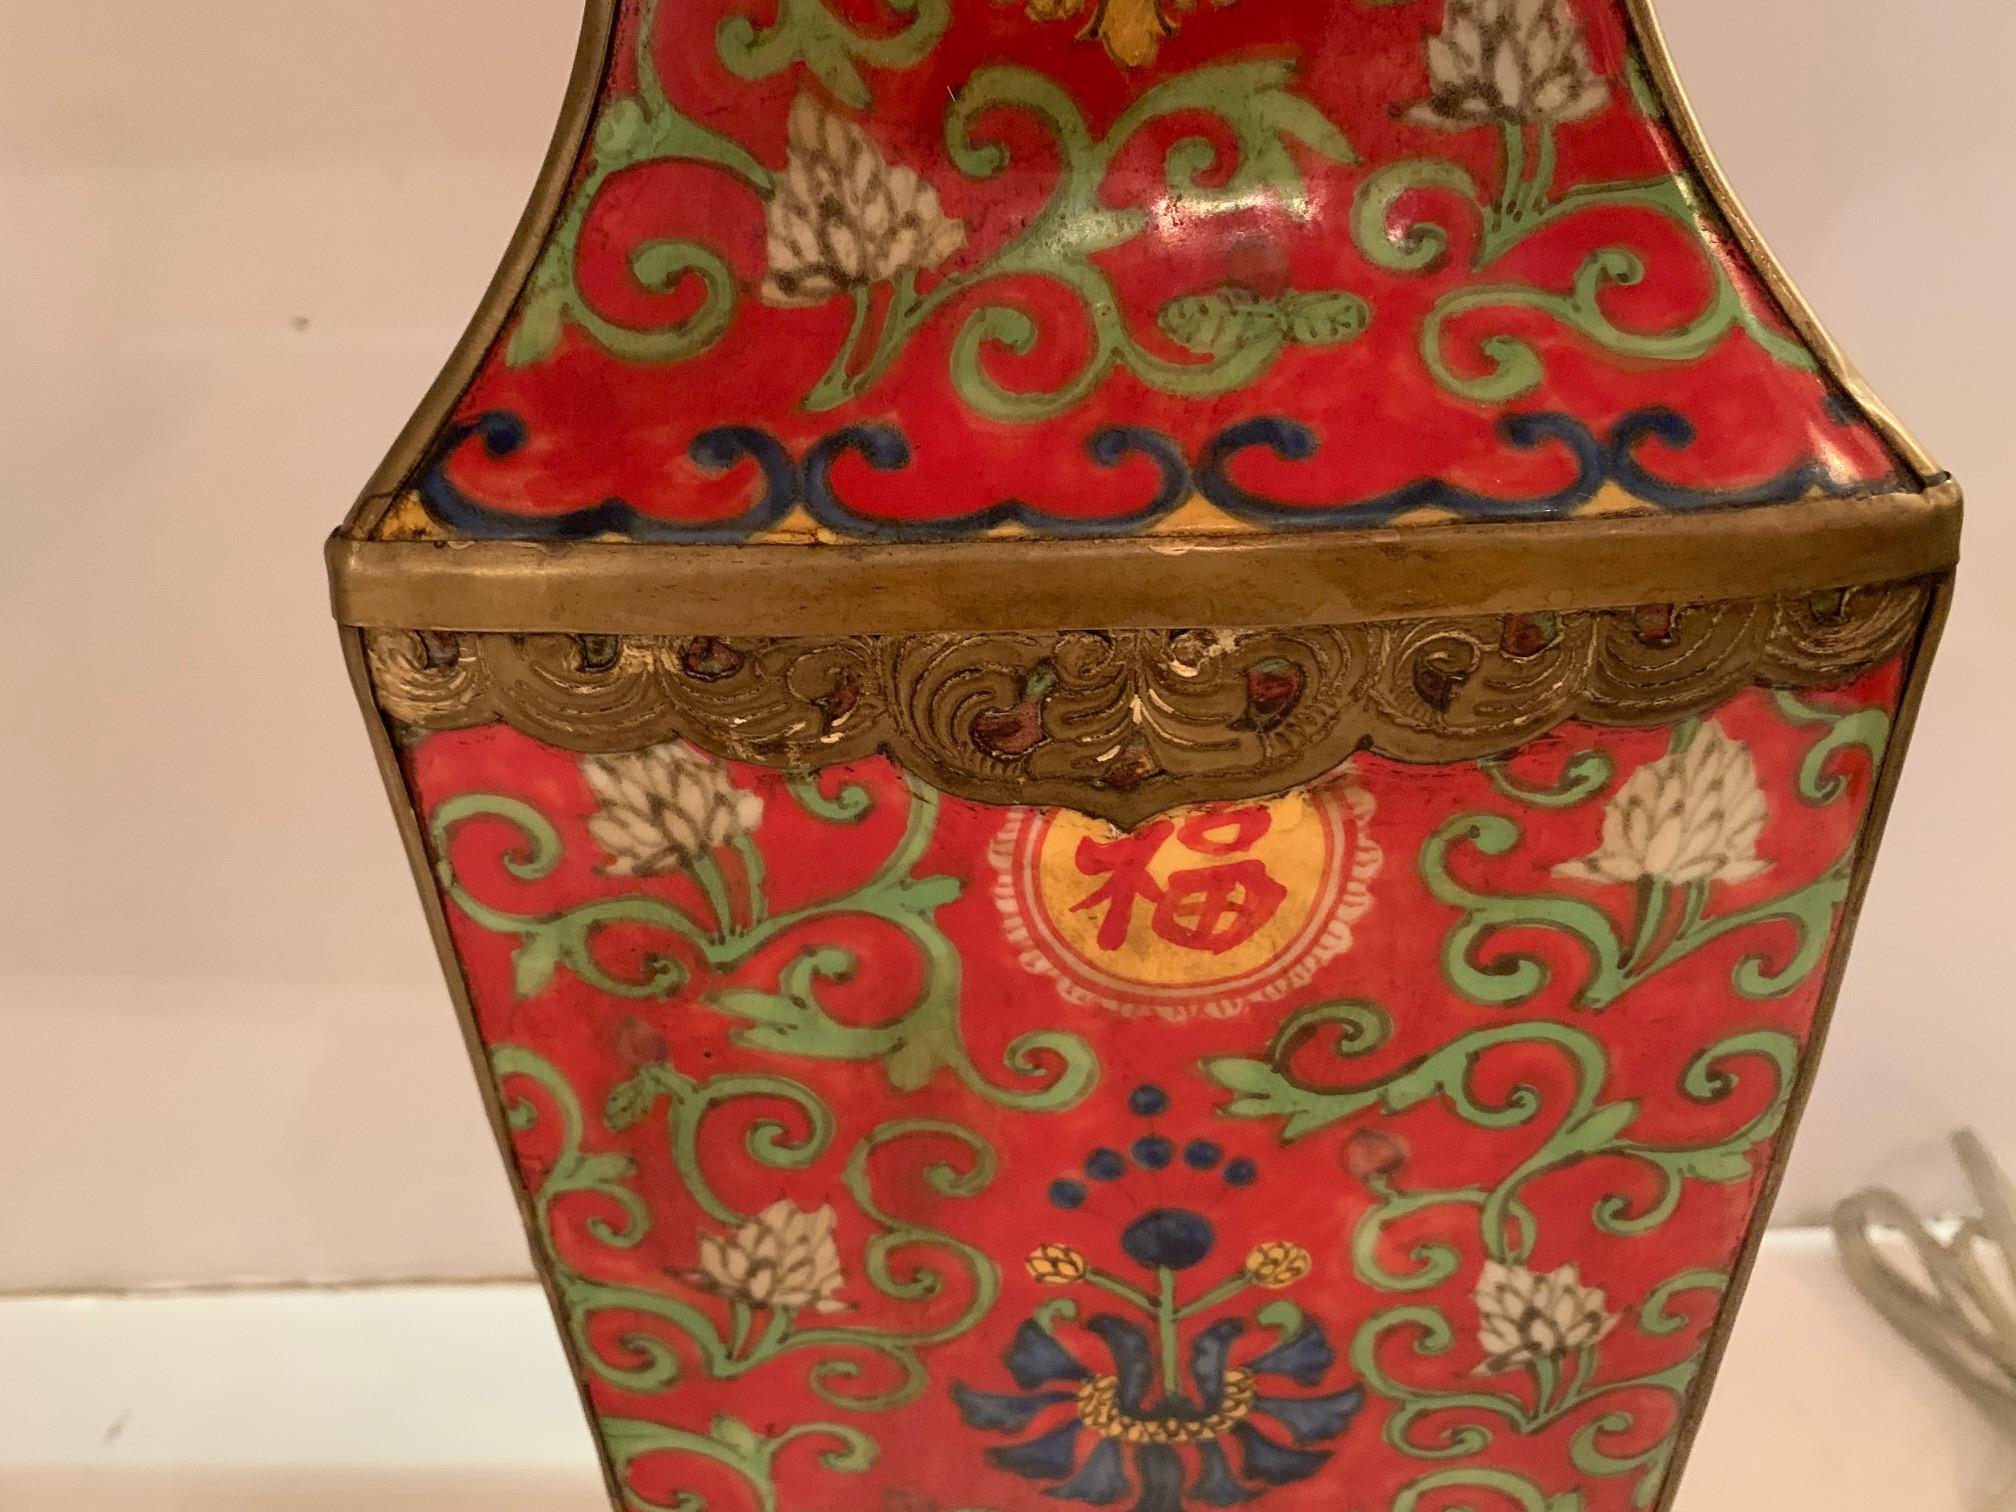 A gorgeous pair of Chinese red table lamps having meticulous decorative pattern of contrasting green curlicue floral motif including navy blue, yellow and cream embellishments.
Custom silk shade with Asian brass finial.
Base 6.25” square
Shade